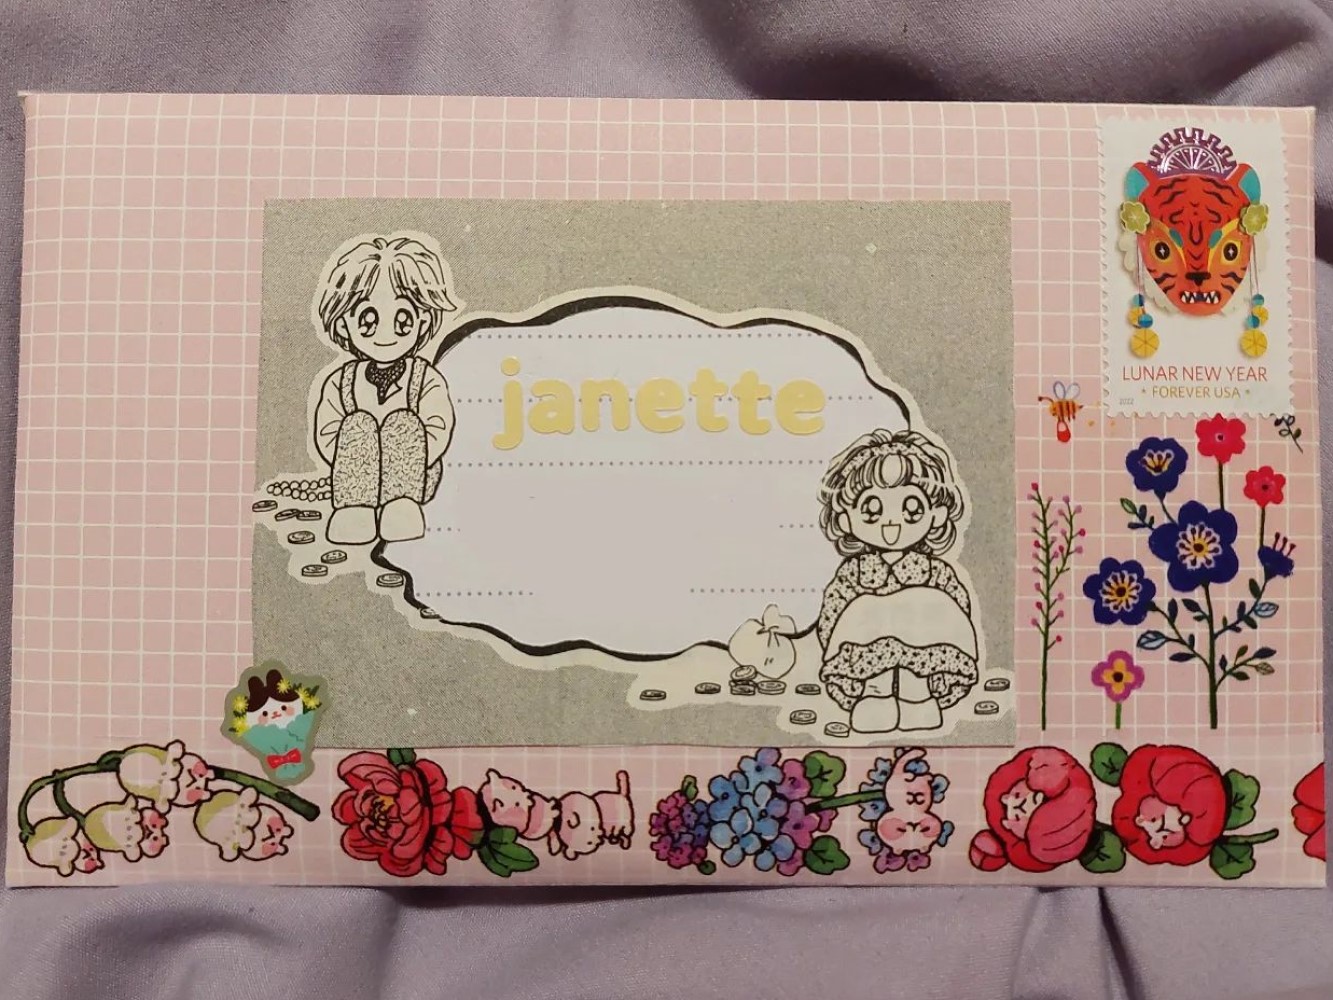 photo of the front of a light pink envelope with a white grid. there is a page cutout from a manga that has two characters sitting opposite each other. between them is a wobbly white shape with the name 'janette' on it in light yellow stickers. colorful flower washi tape decorates the bottom of the envelope